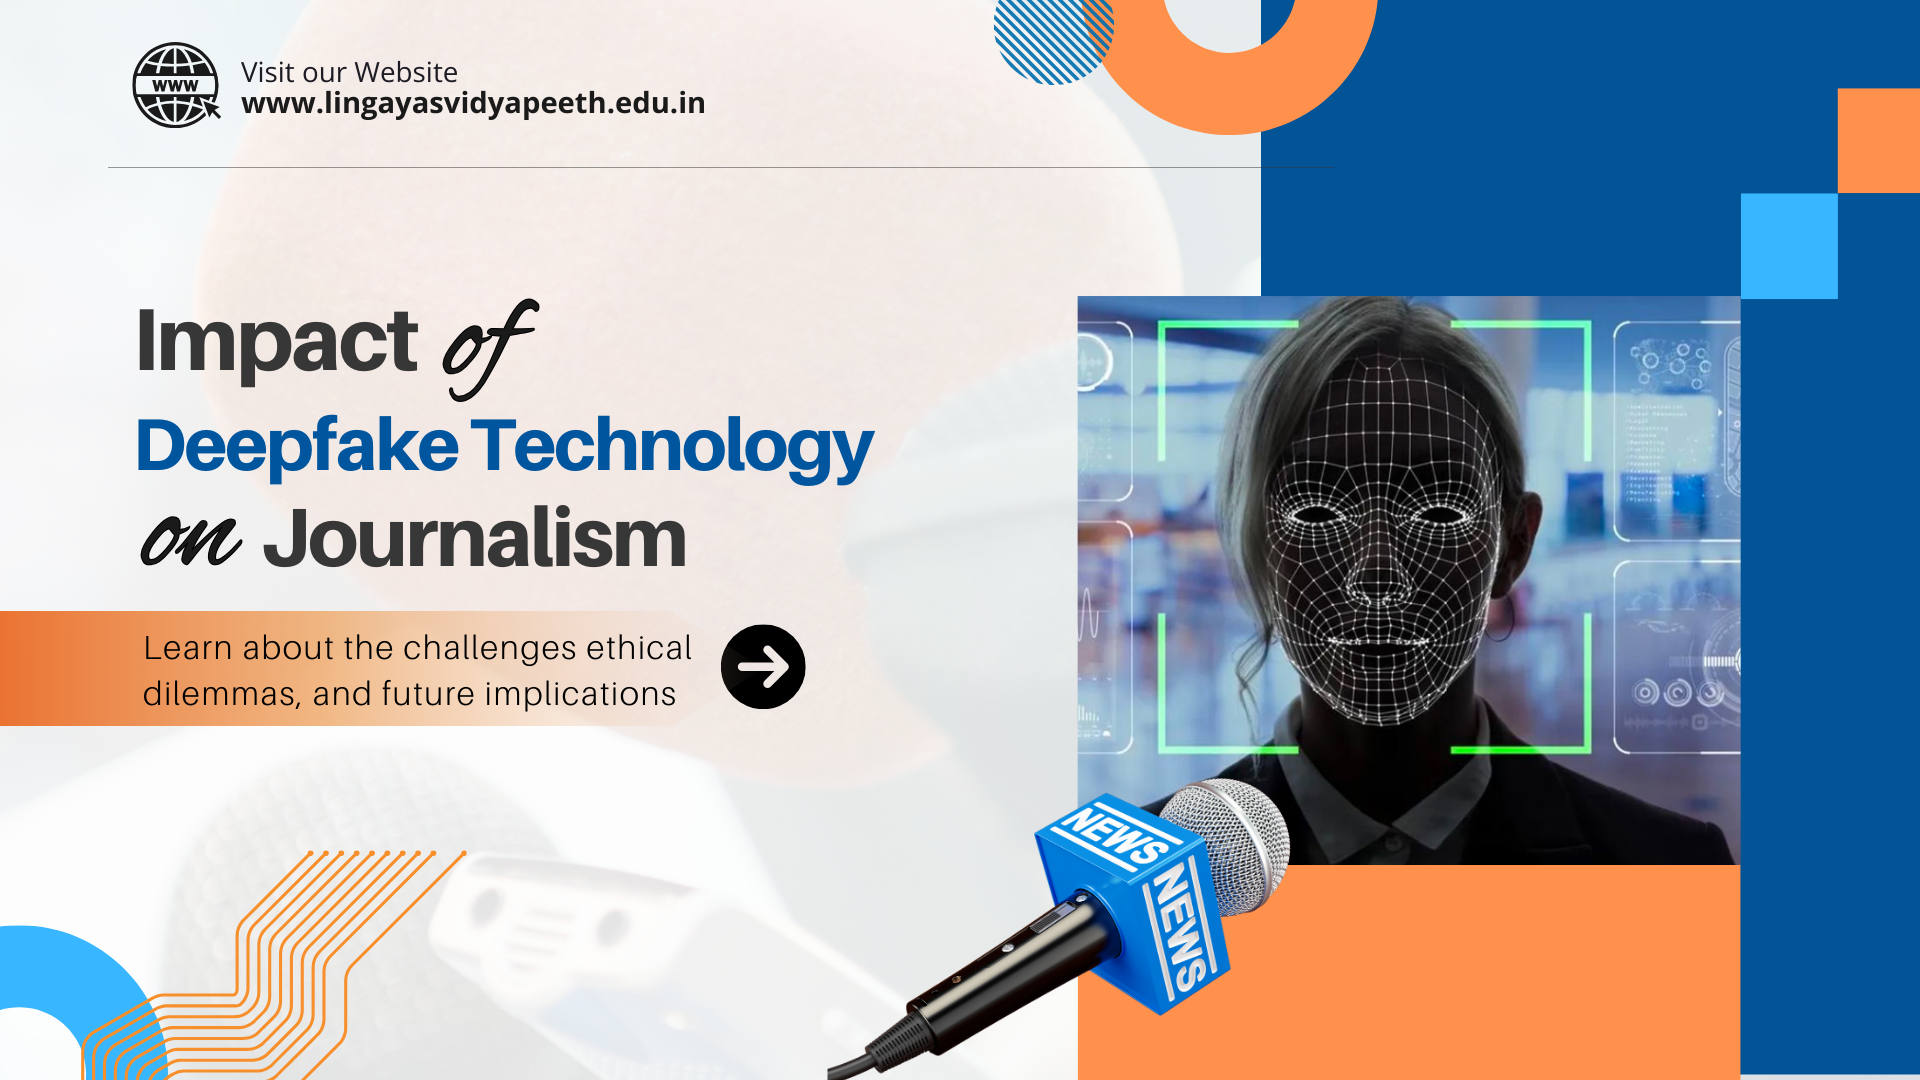 What Impact Is Deepfake Technology Having on Journalism in India?